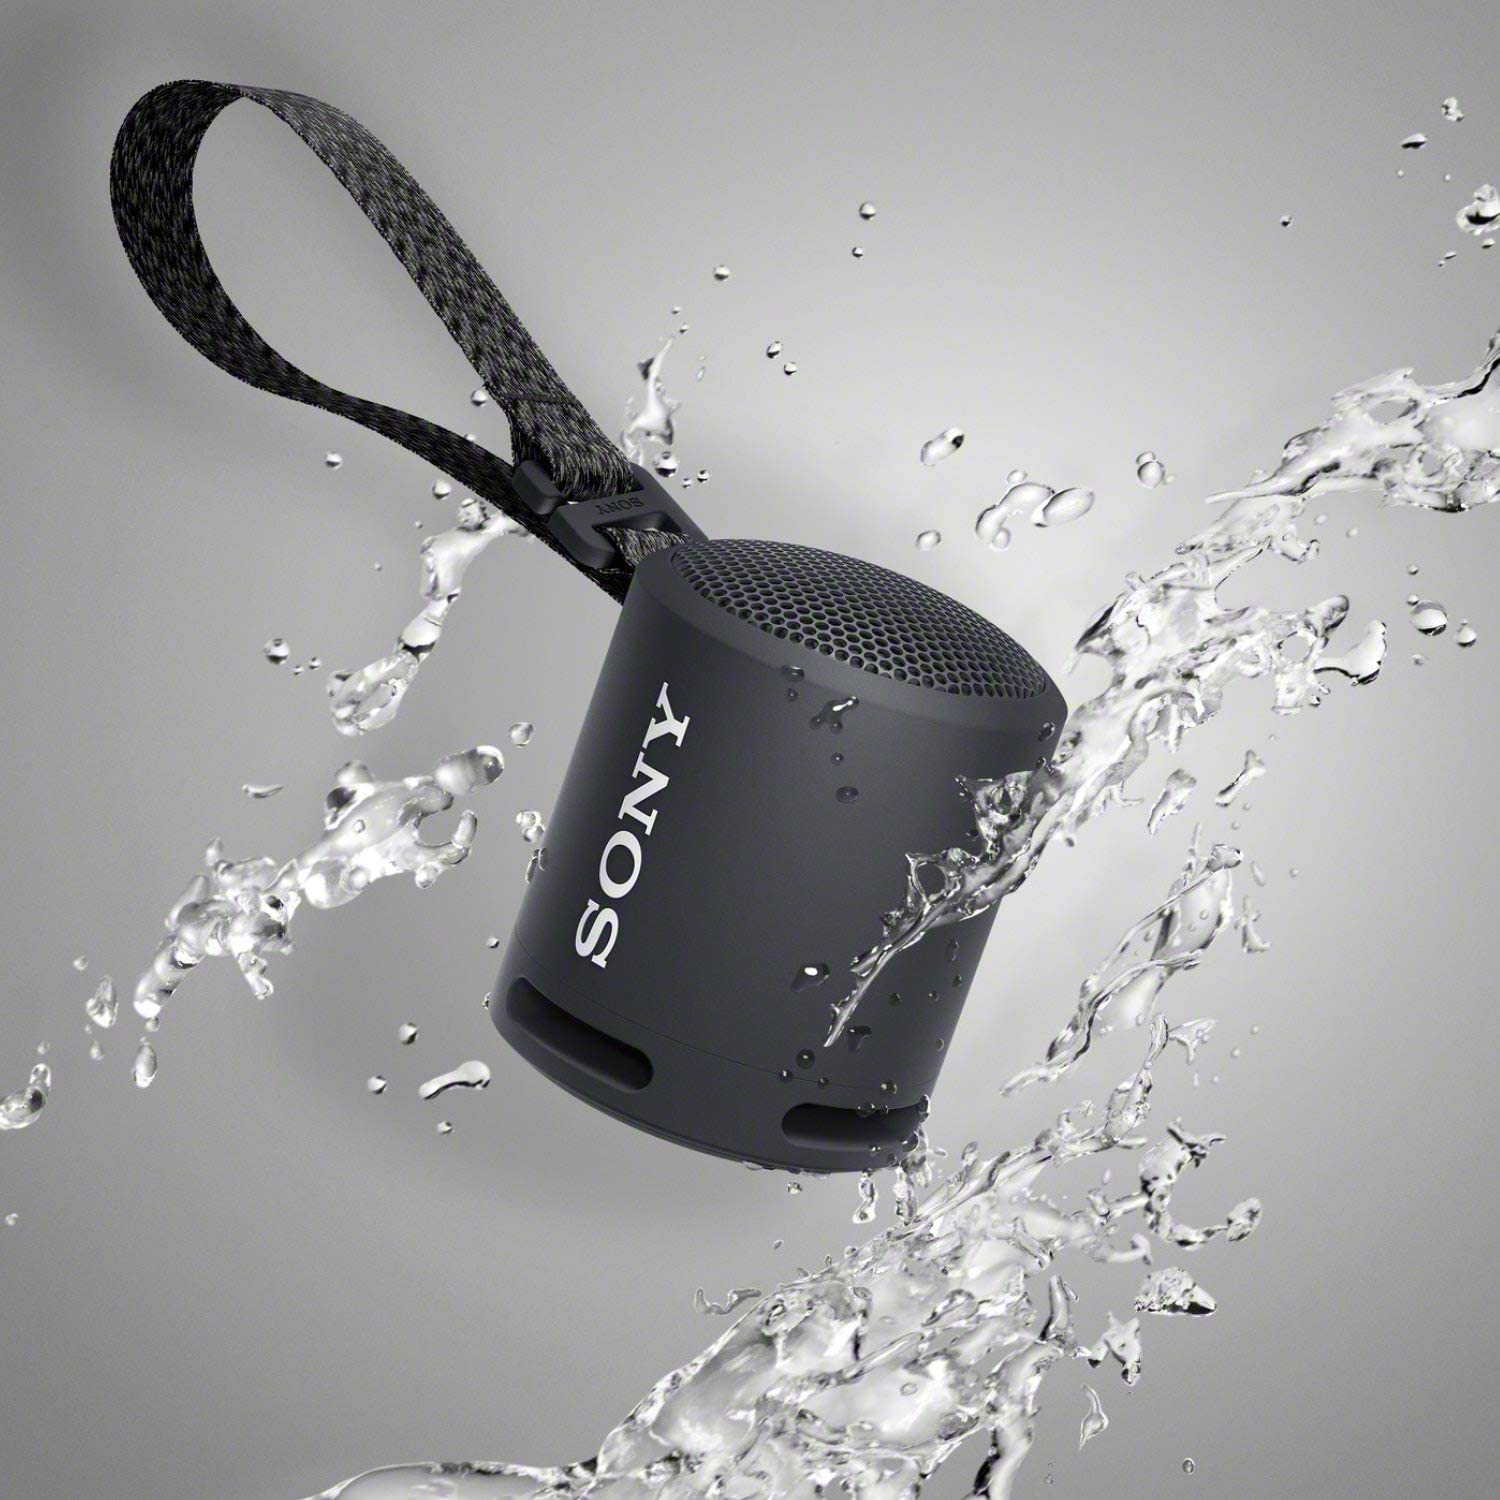 Sony SRS-XB13 Extra BASS Wireless Portable Compact Speaker IP67 Waterproof Bluetooth, Black - Celltronics.lk | Online Mobile and Accessories Store in Sri Lanka